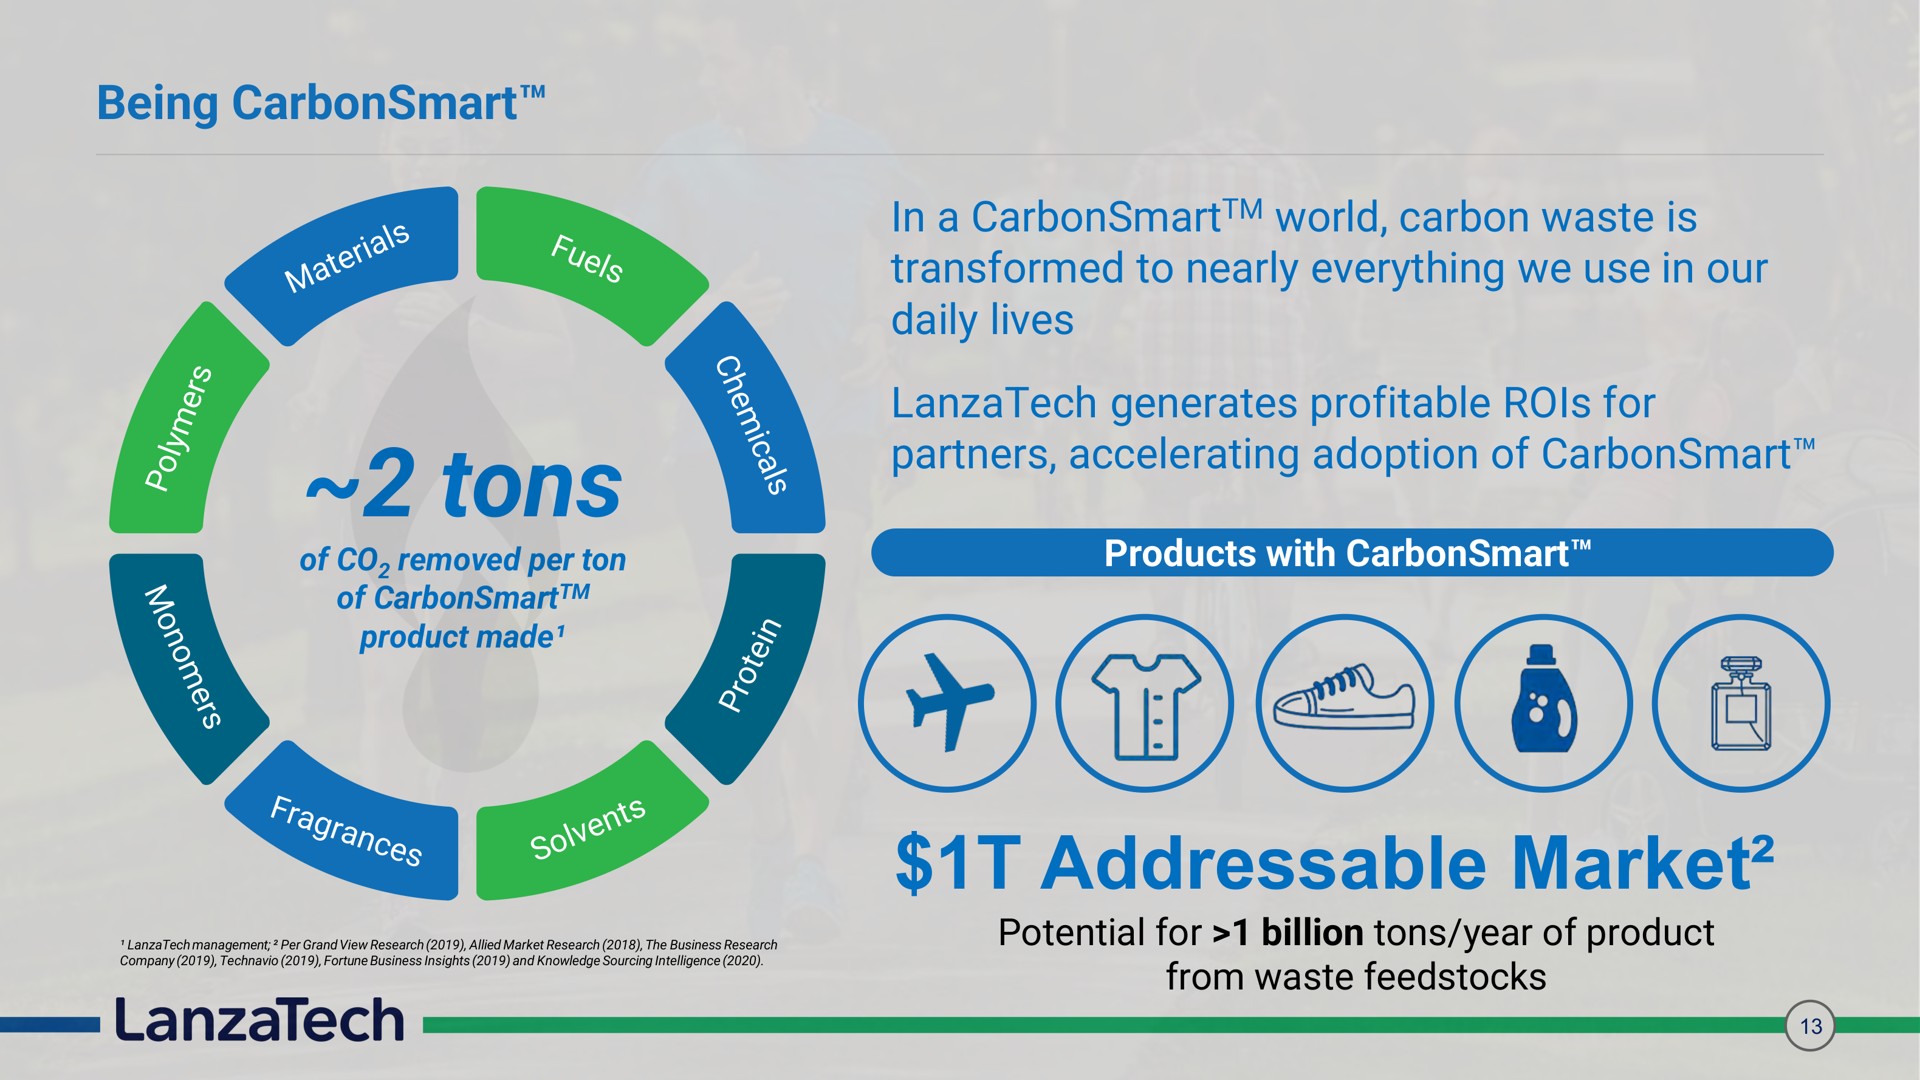 being tons in a world carbon waste is transformed to nearly everything we use in our daily lives generates profitable rois for partners accelerating adoption of market | LanzaTech